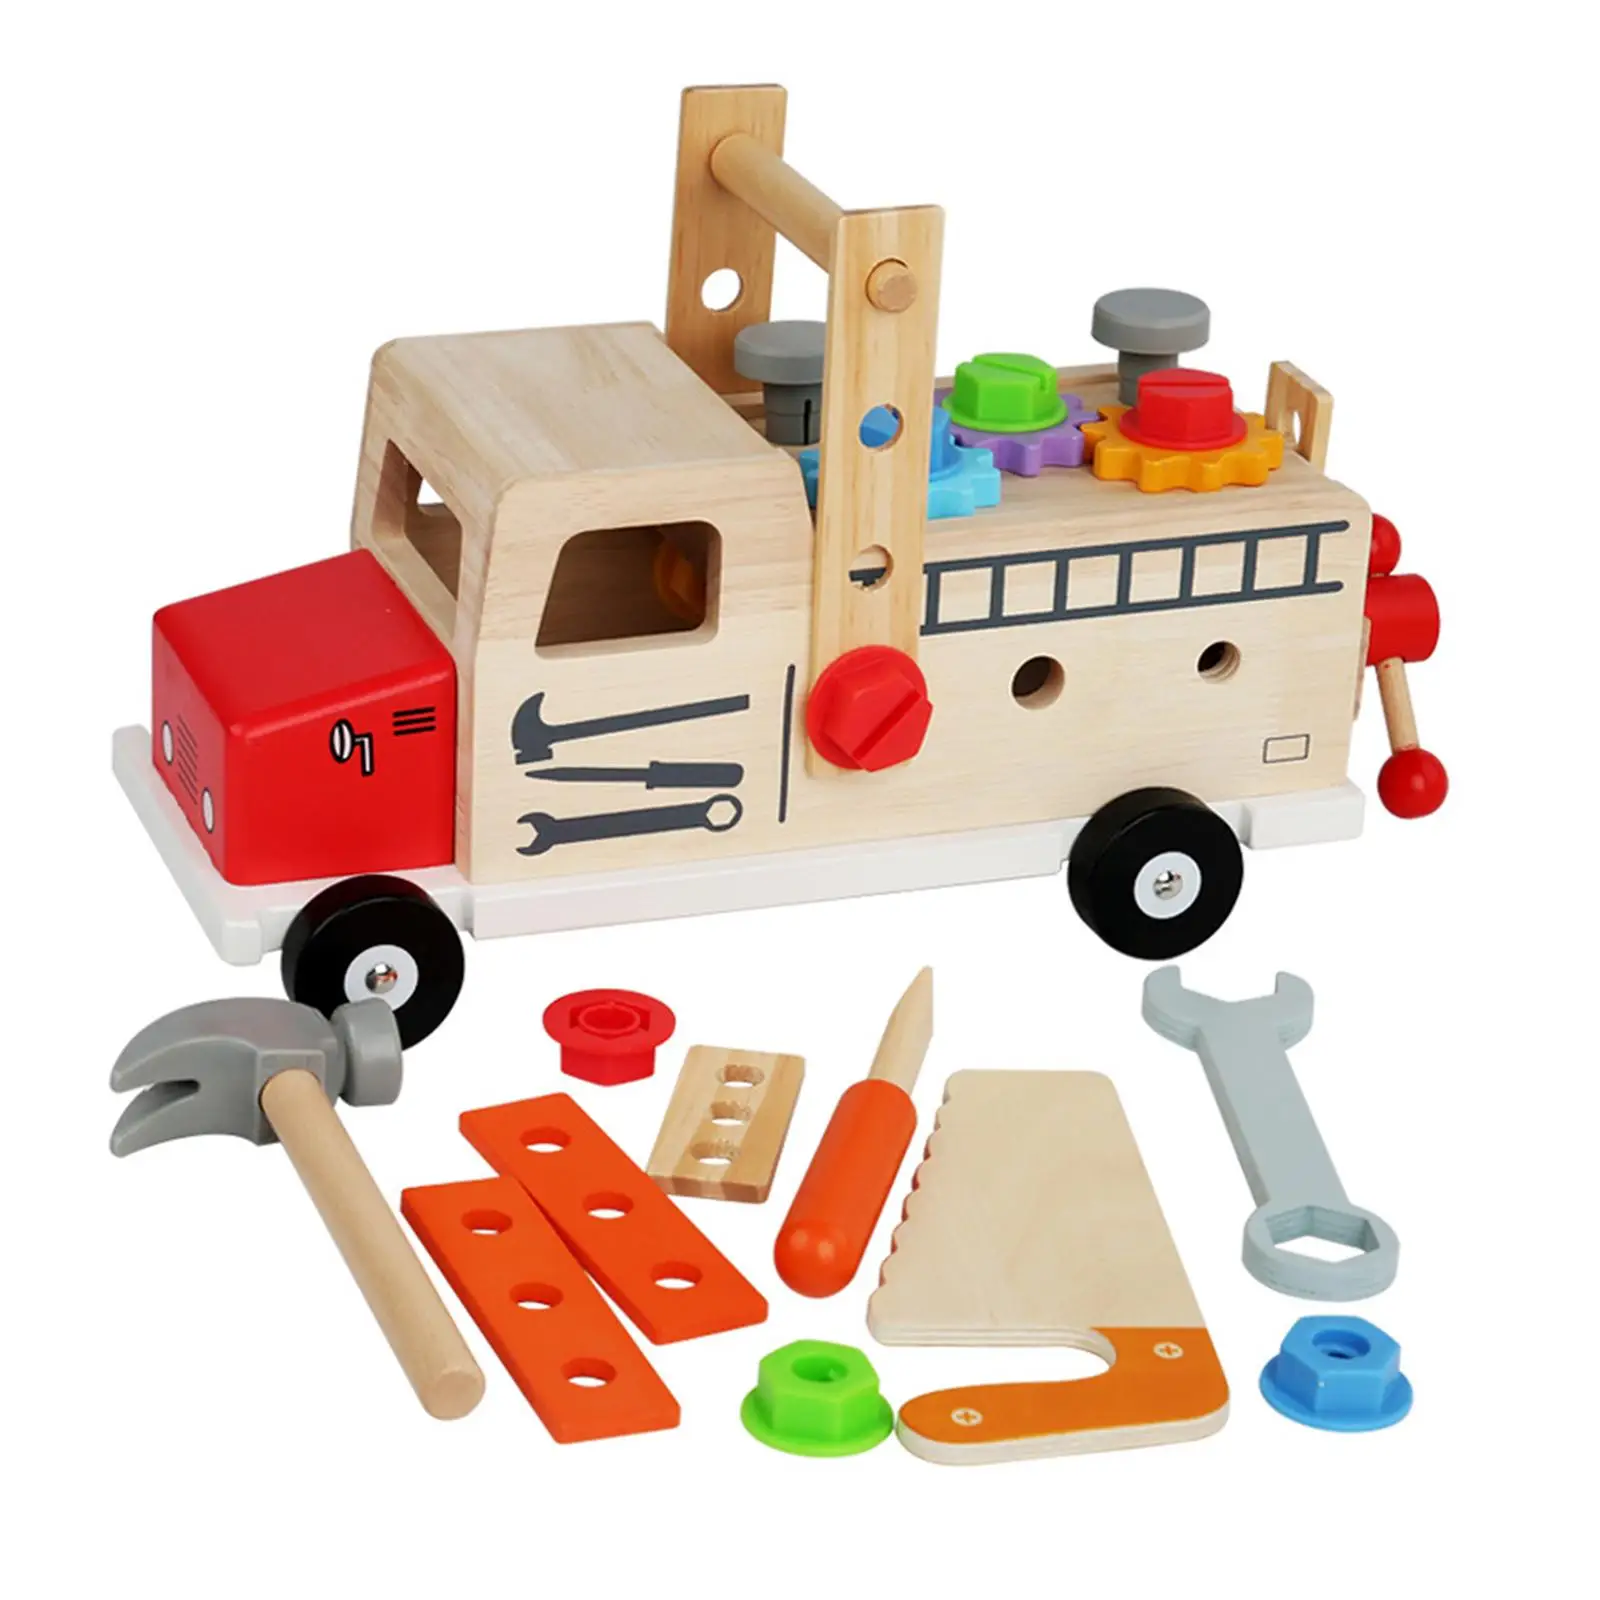 Construction Toy Wood Kids Tool Set Kids Tool Screwing Assembly Carpenter Toy for 3 4 5 6 Years Old Children Kids Party Favors